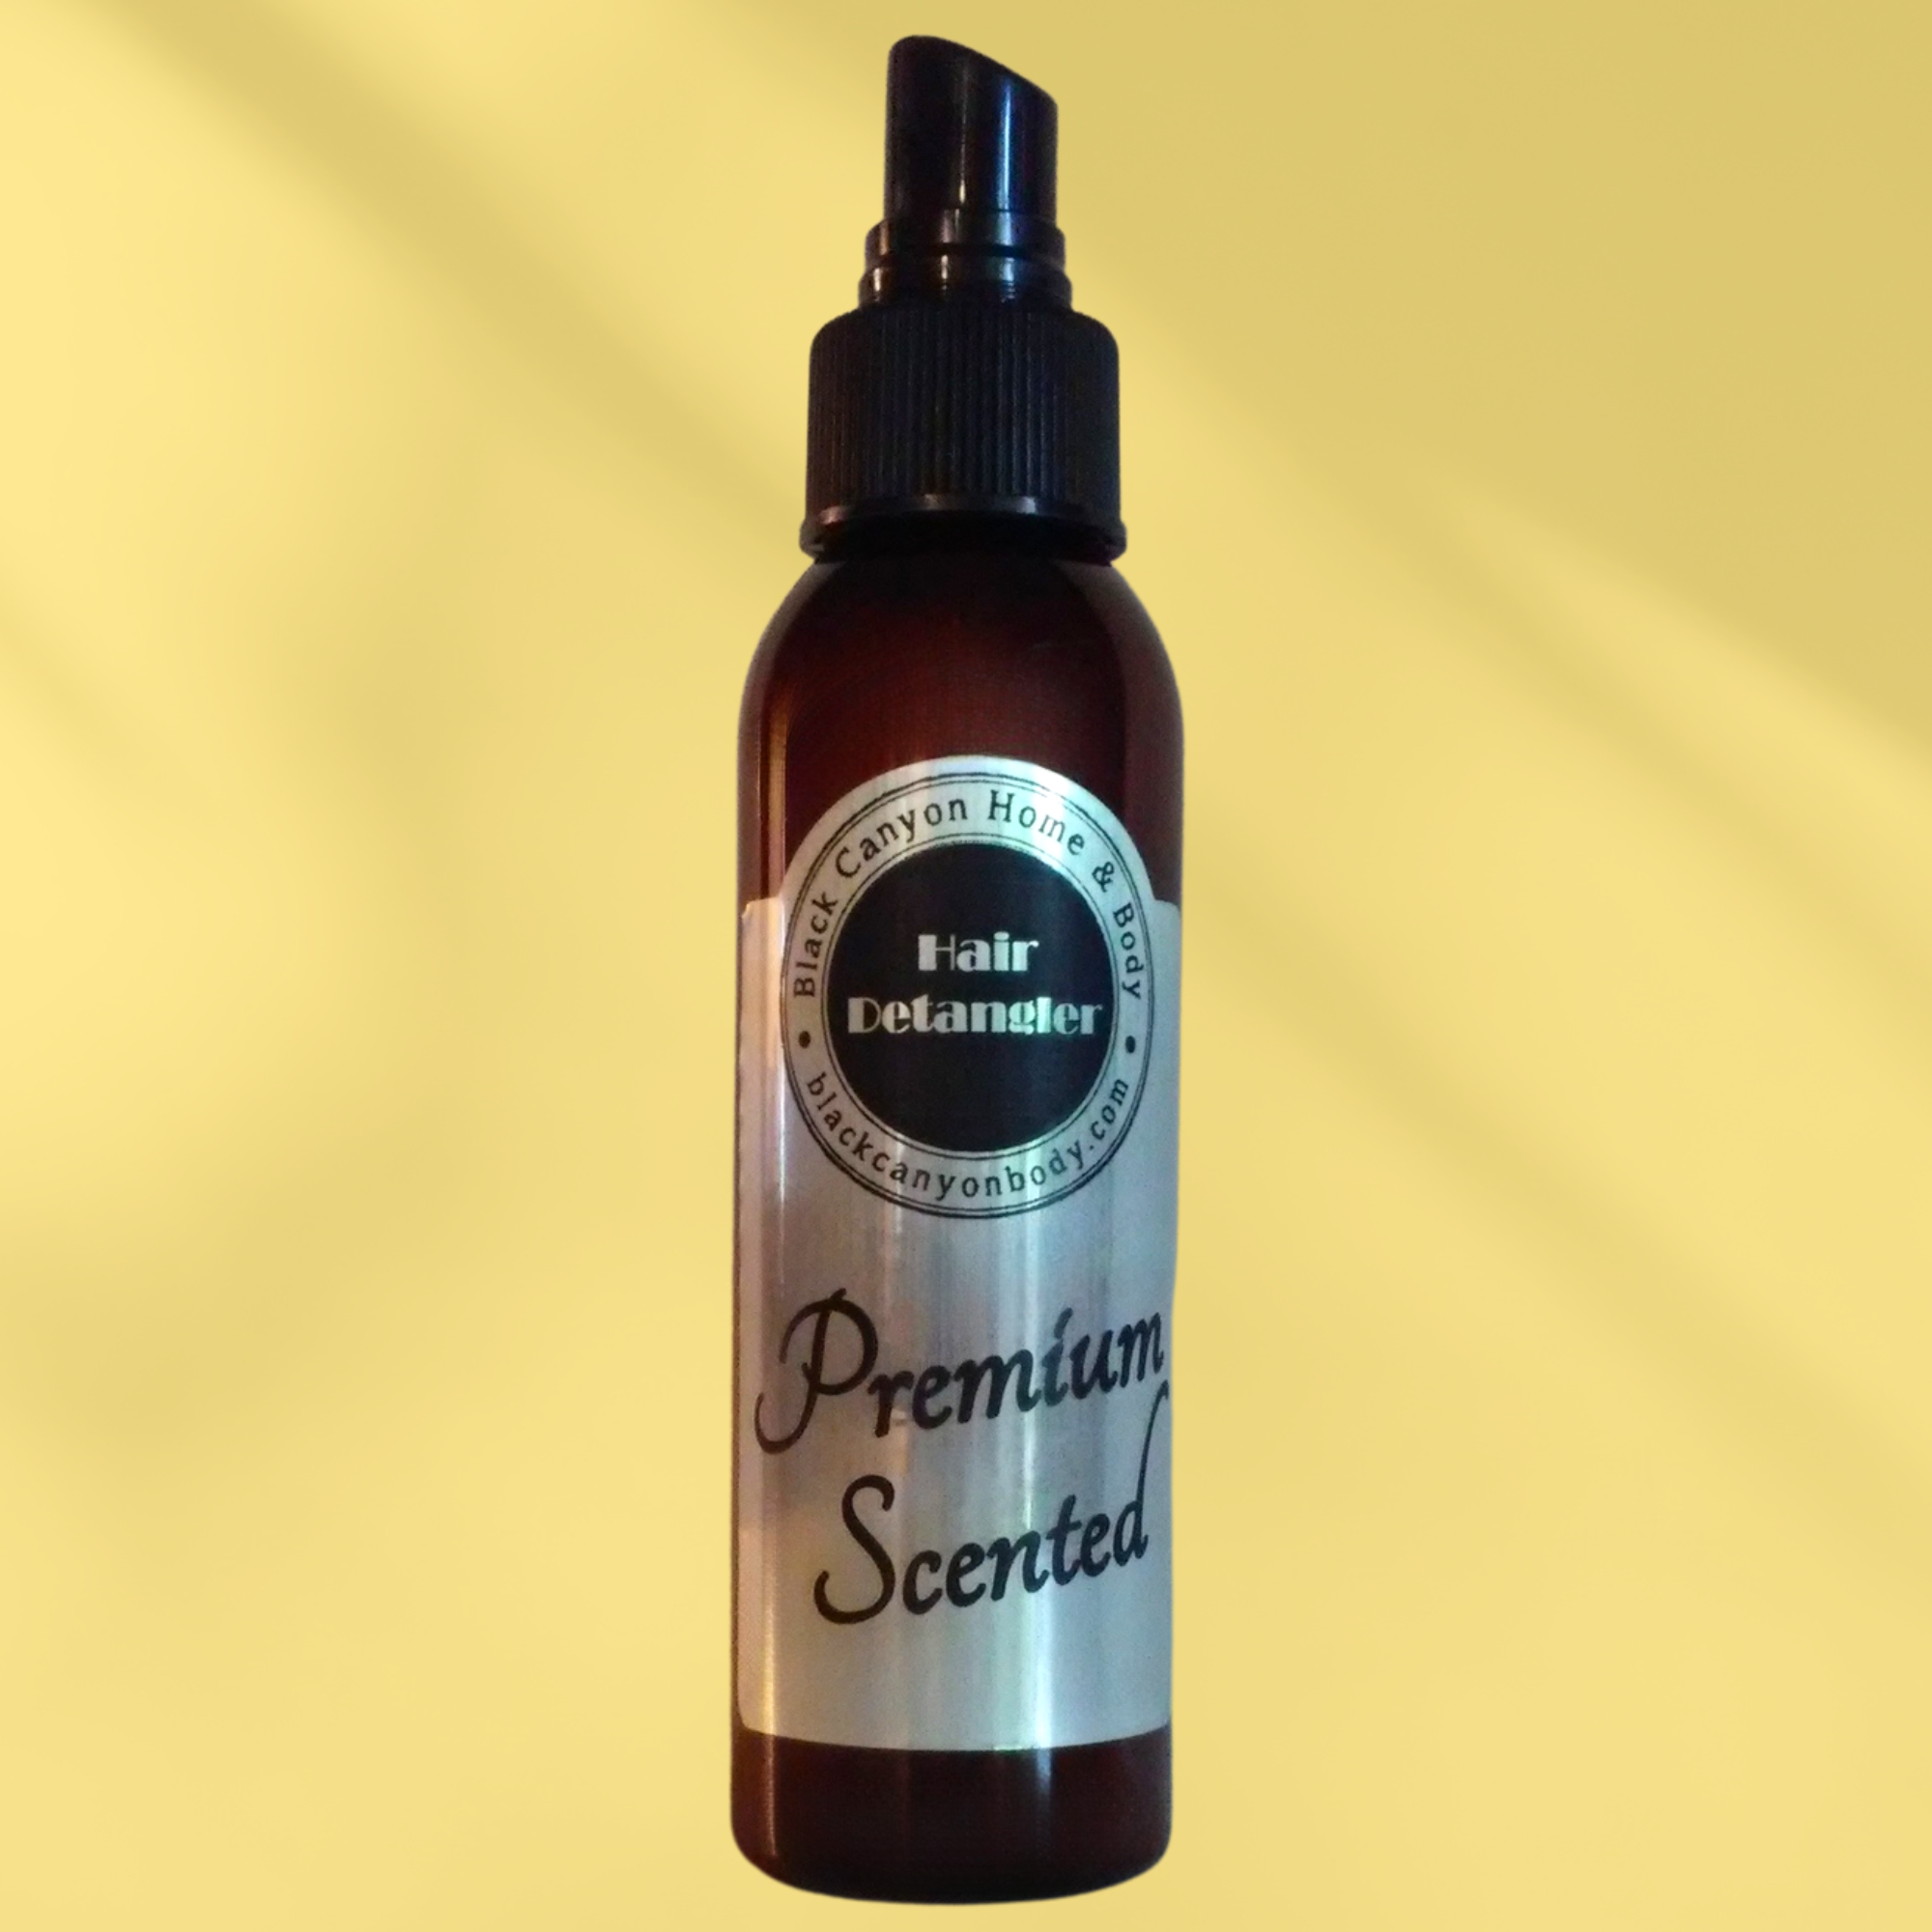 Black Canyon Autumn Spiced Woods Scented Hair Detangler Spray with Olive Oil